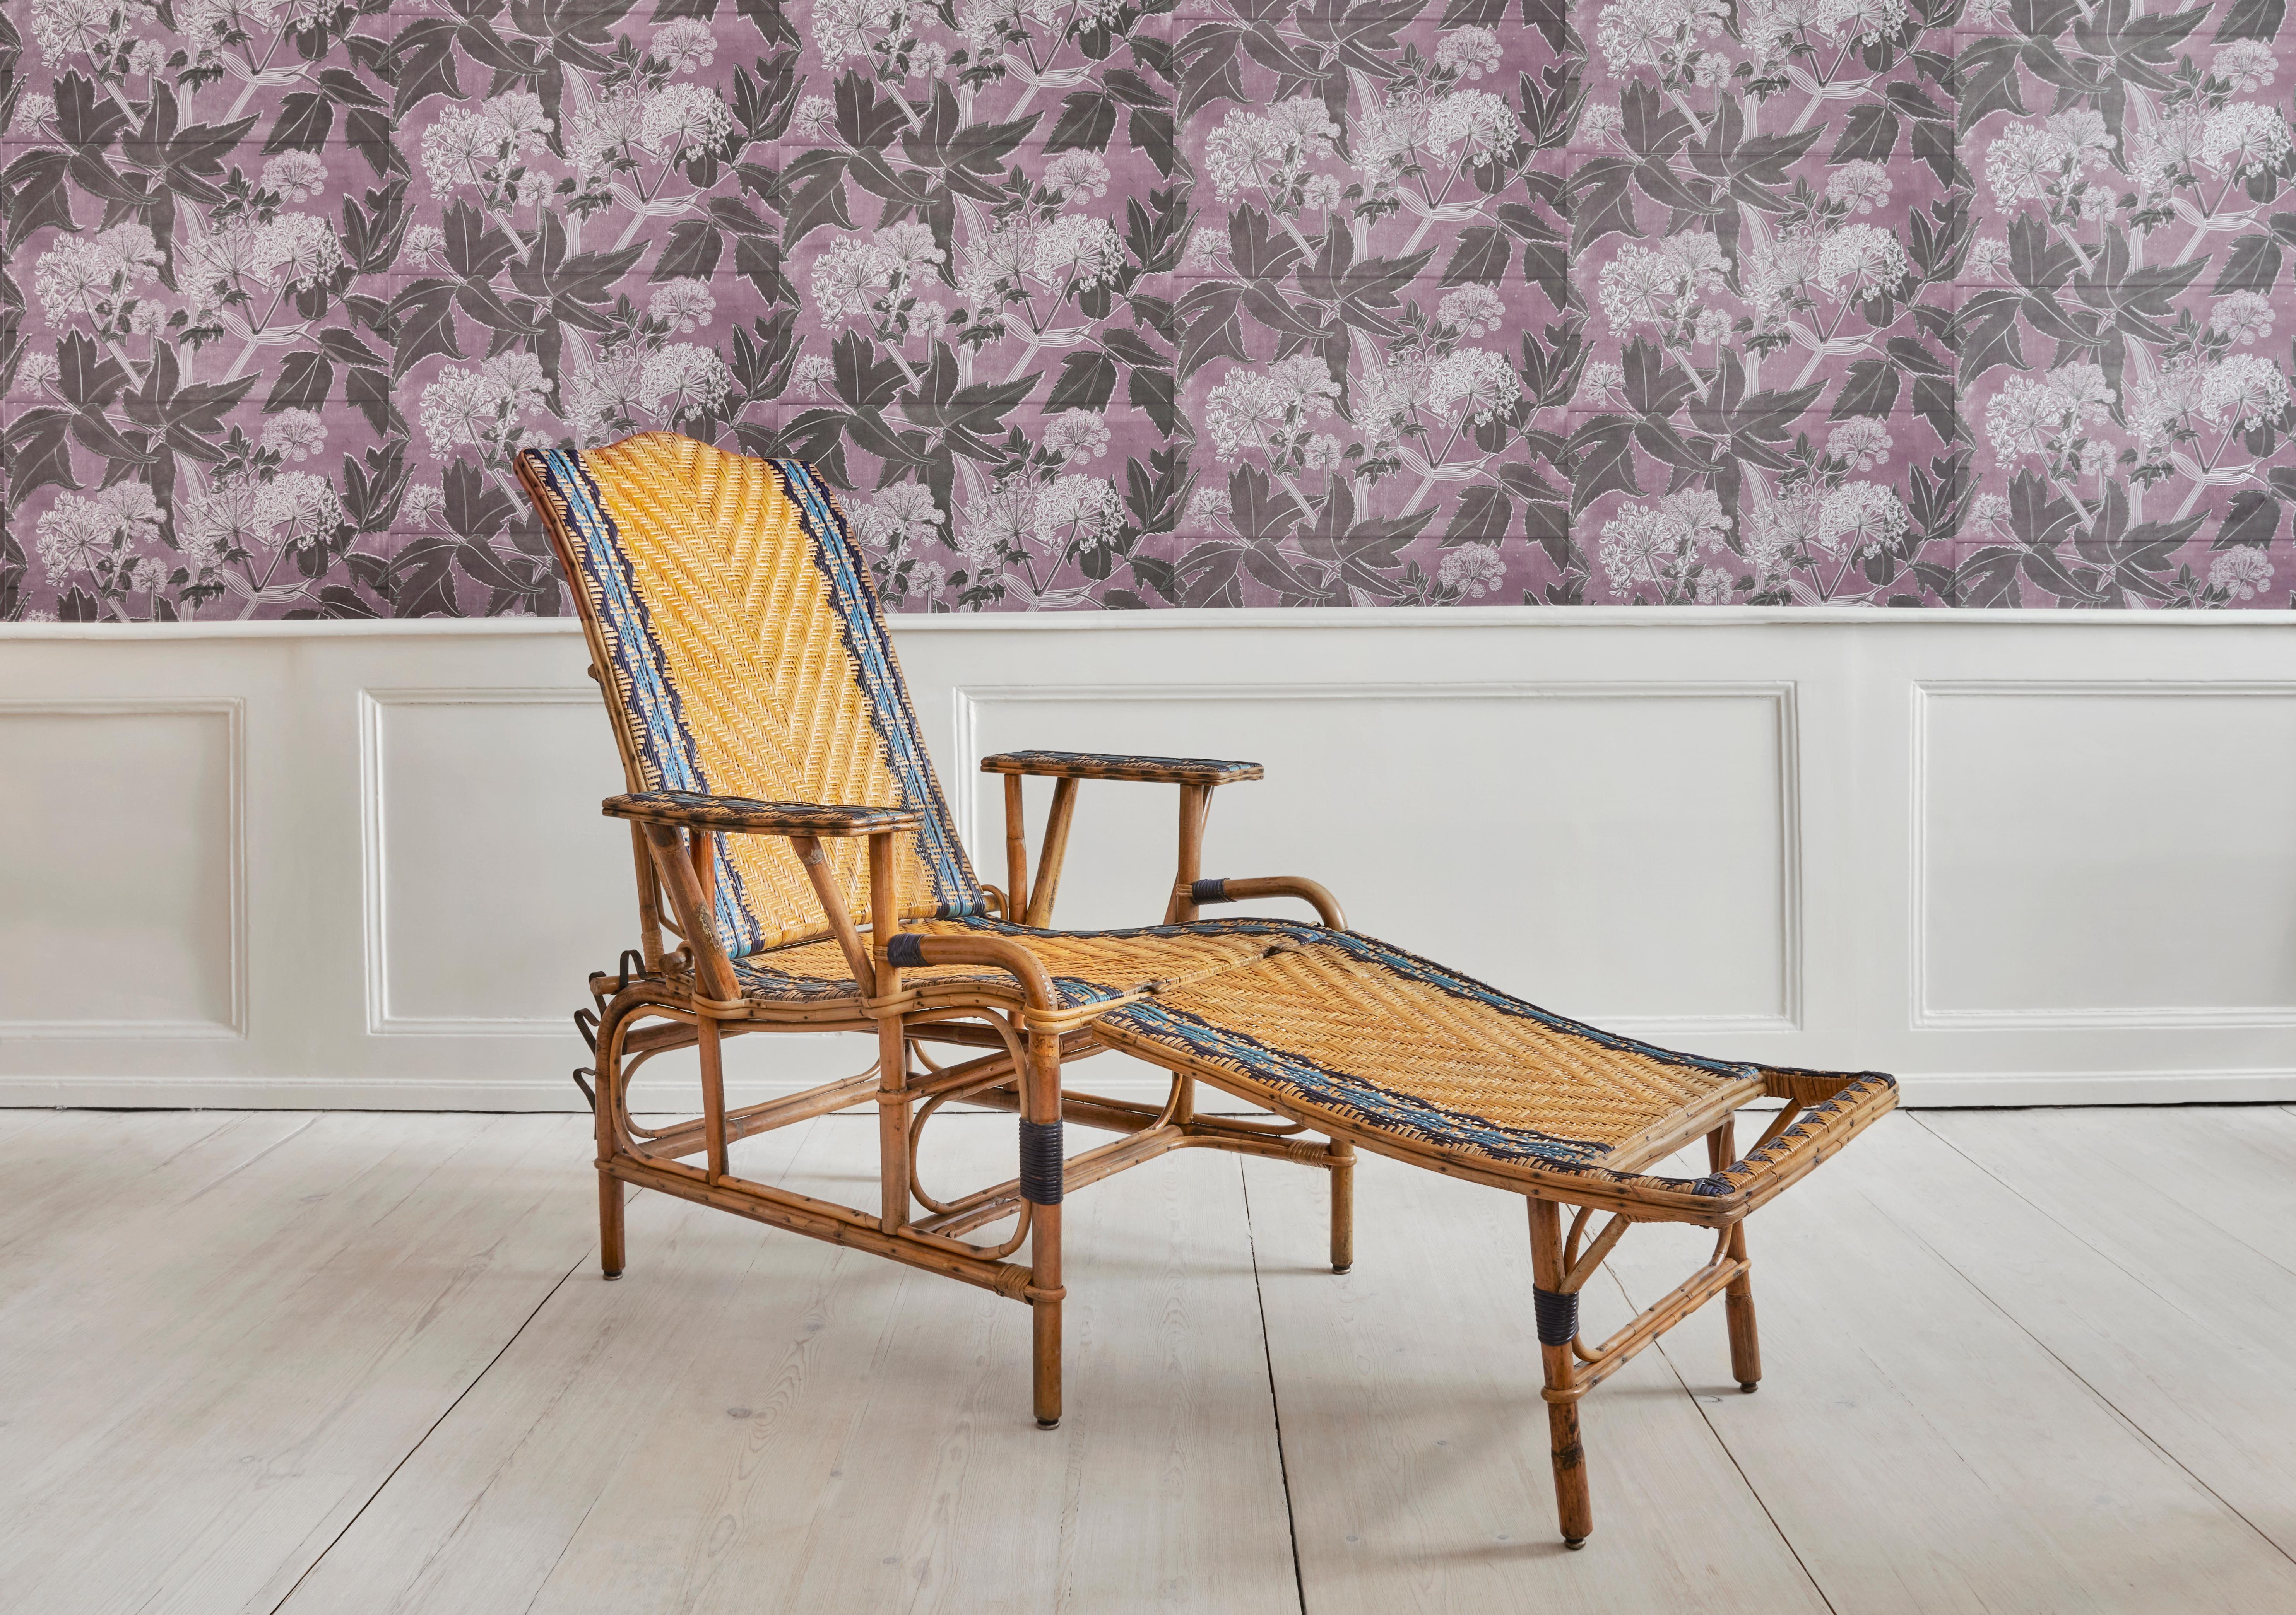 France, 1930's

Vintage chaise longue in rattan with blue and black woven details. 

Measures: H 105 x W 70 x D 65 (udfoldet 135) cm.